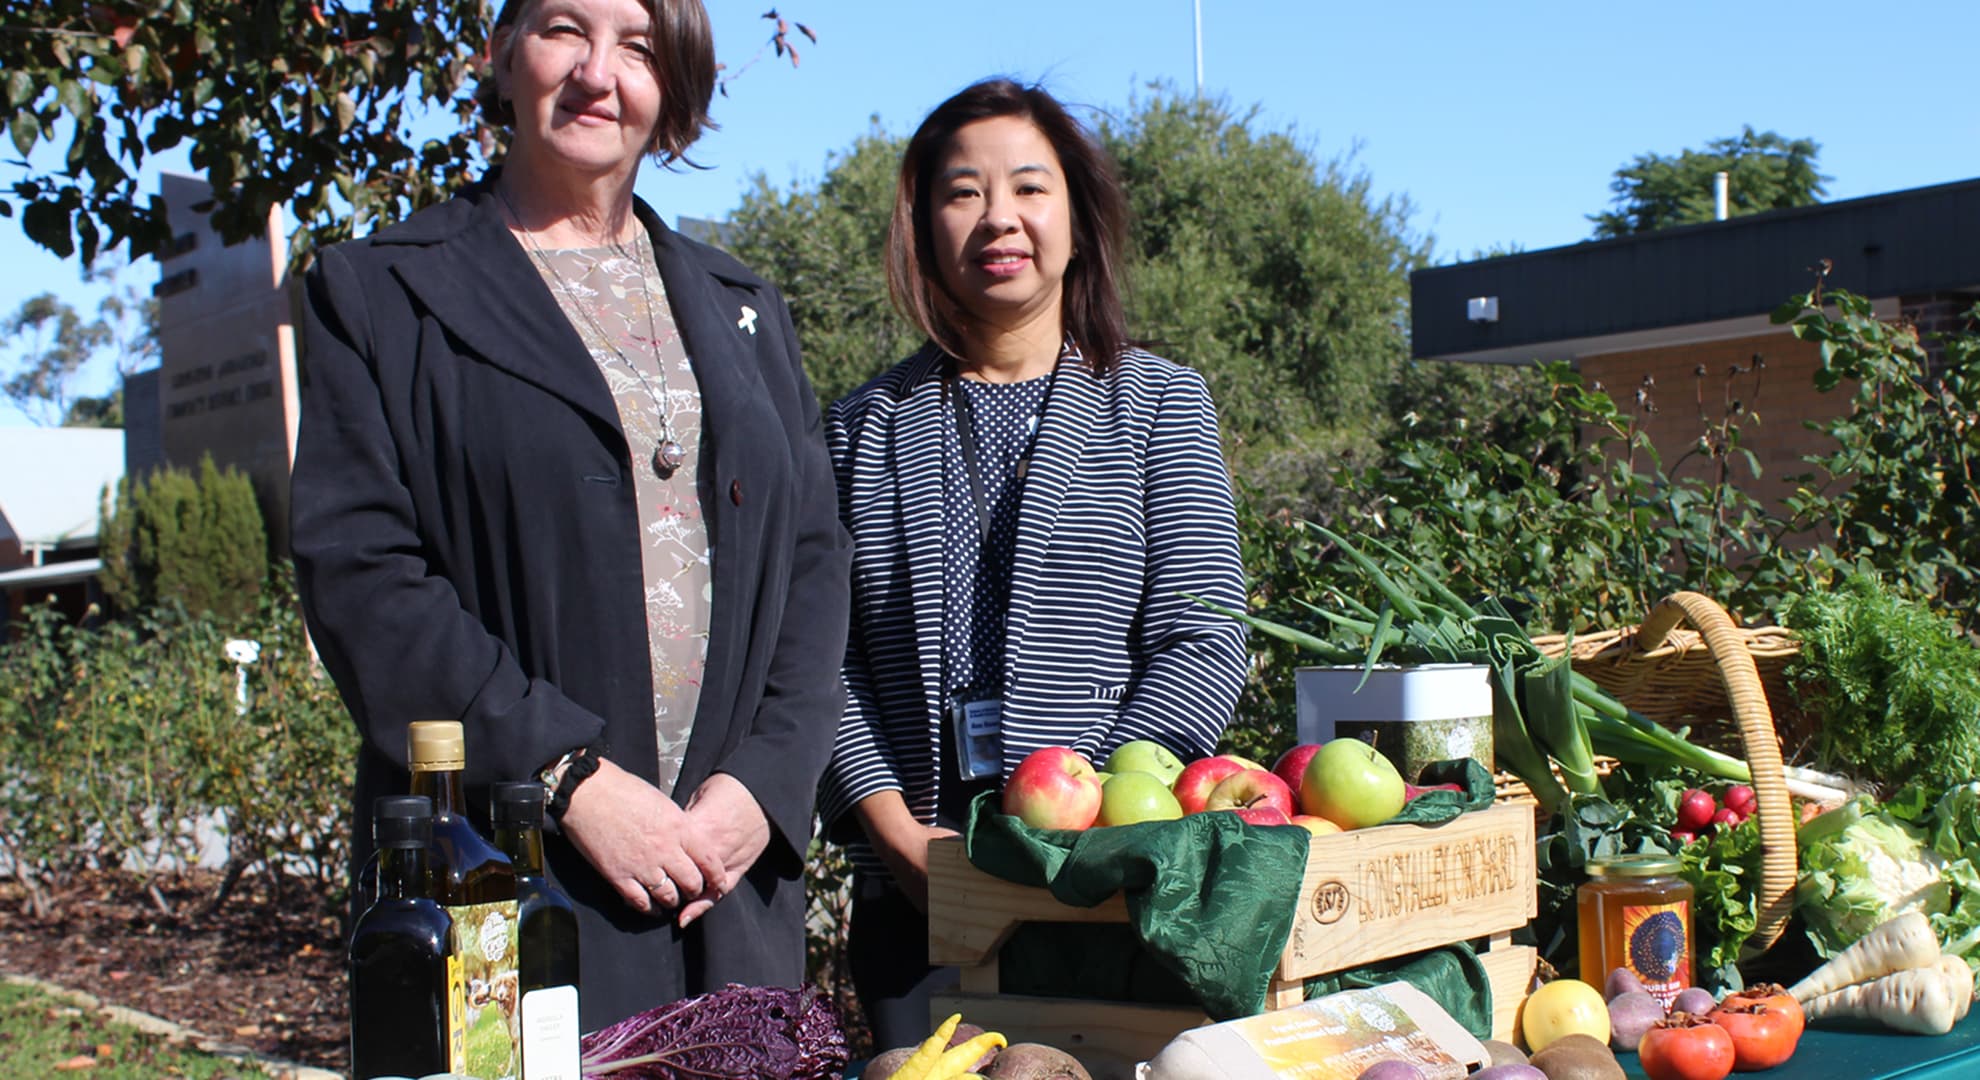 Two women stand behind table full of fresh fruit and vegetables